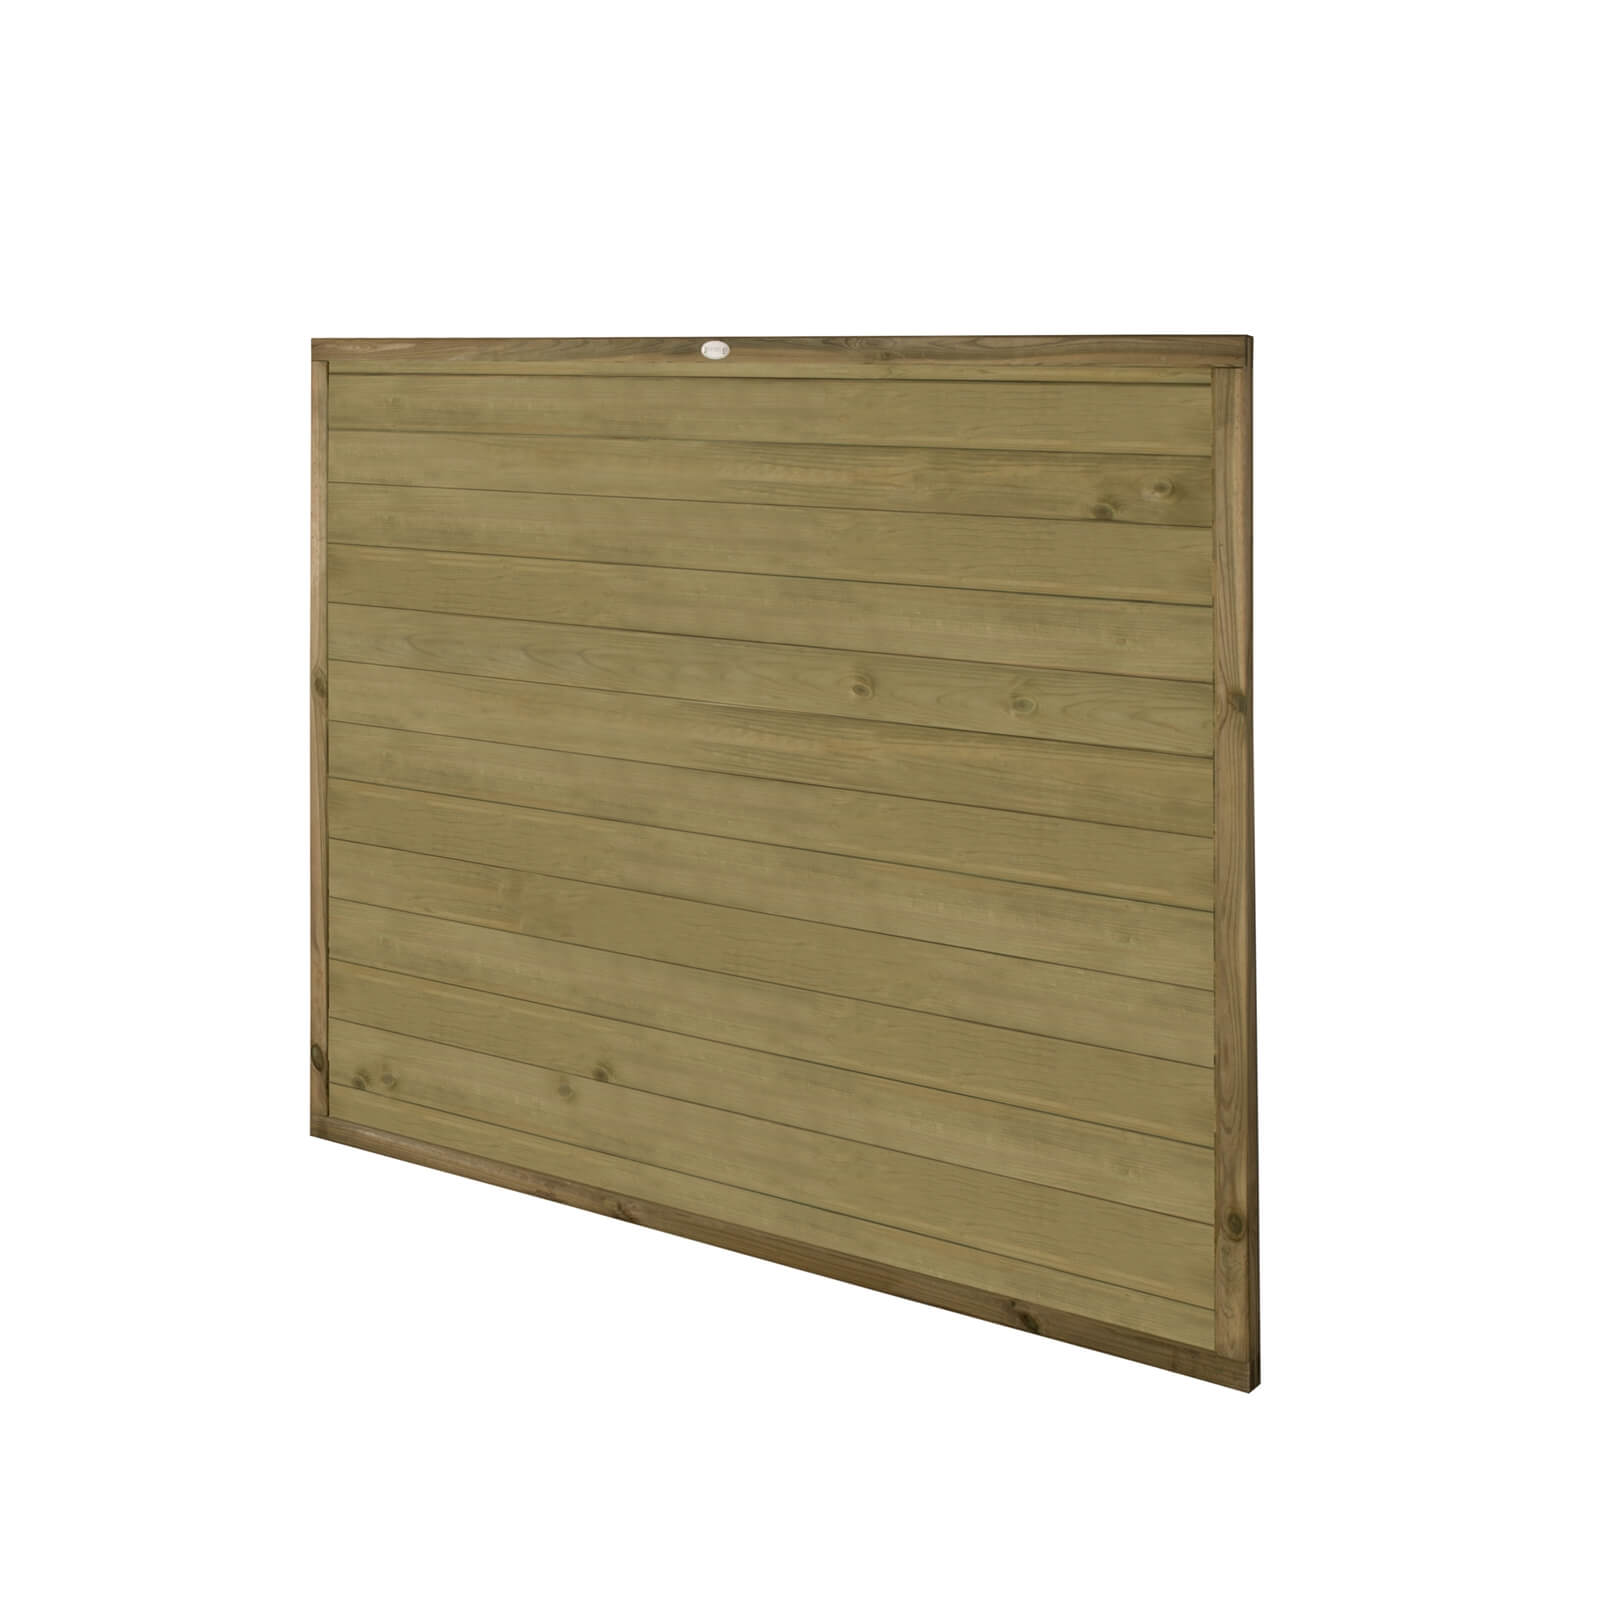 Horizontal Tongue & Groove Fence Panel - 5ft - Pack of 3